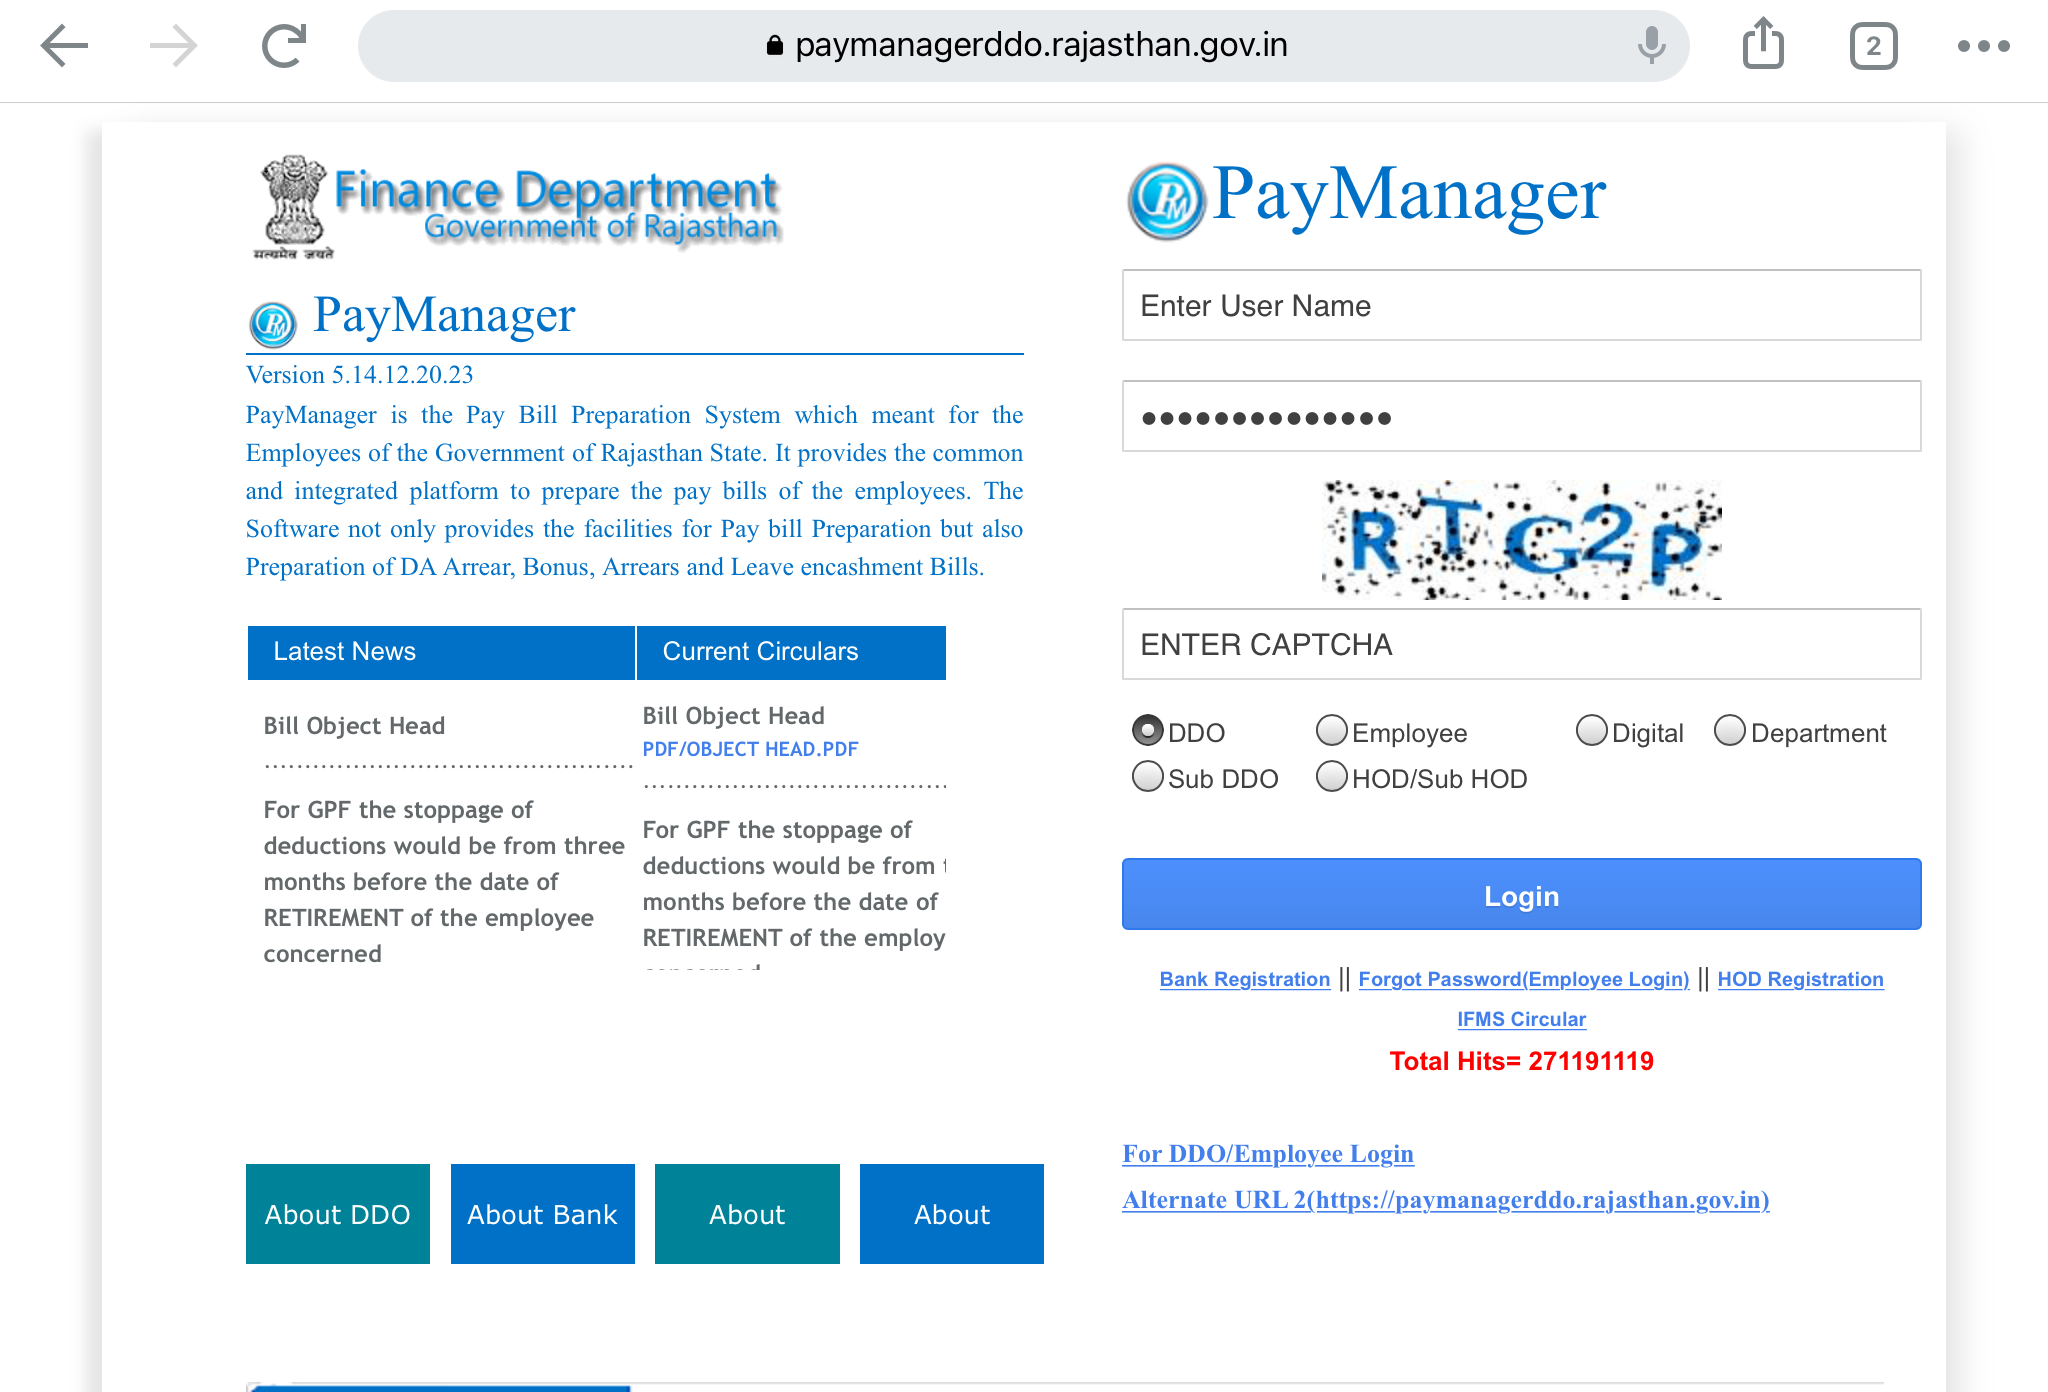 PayManager official website